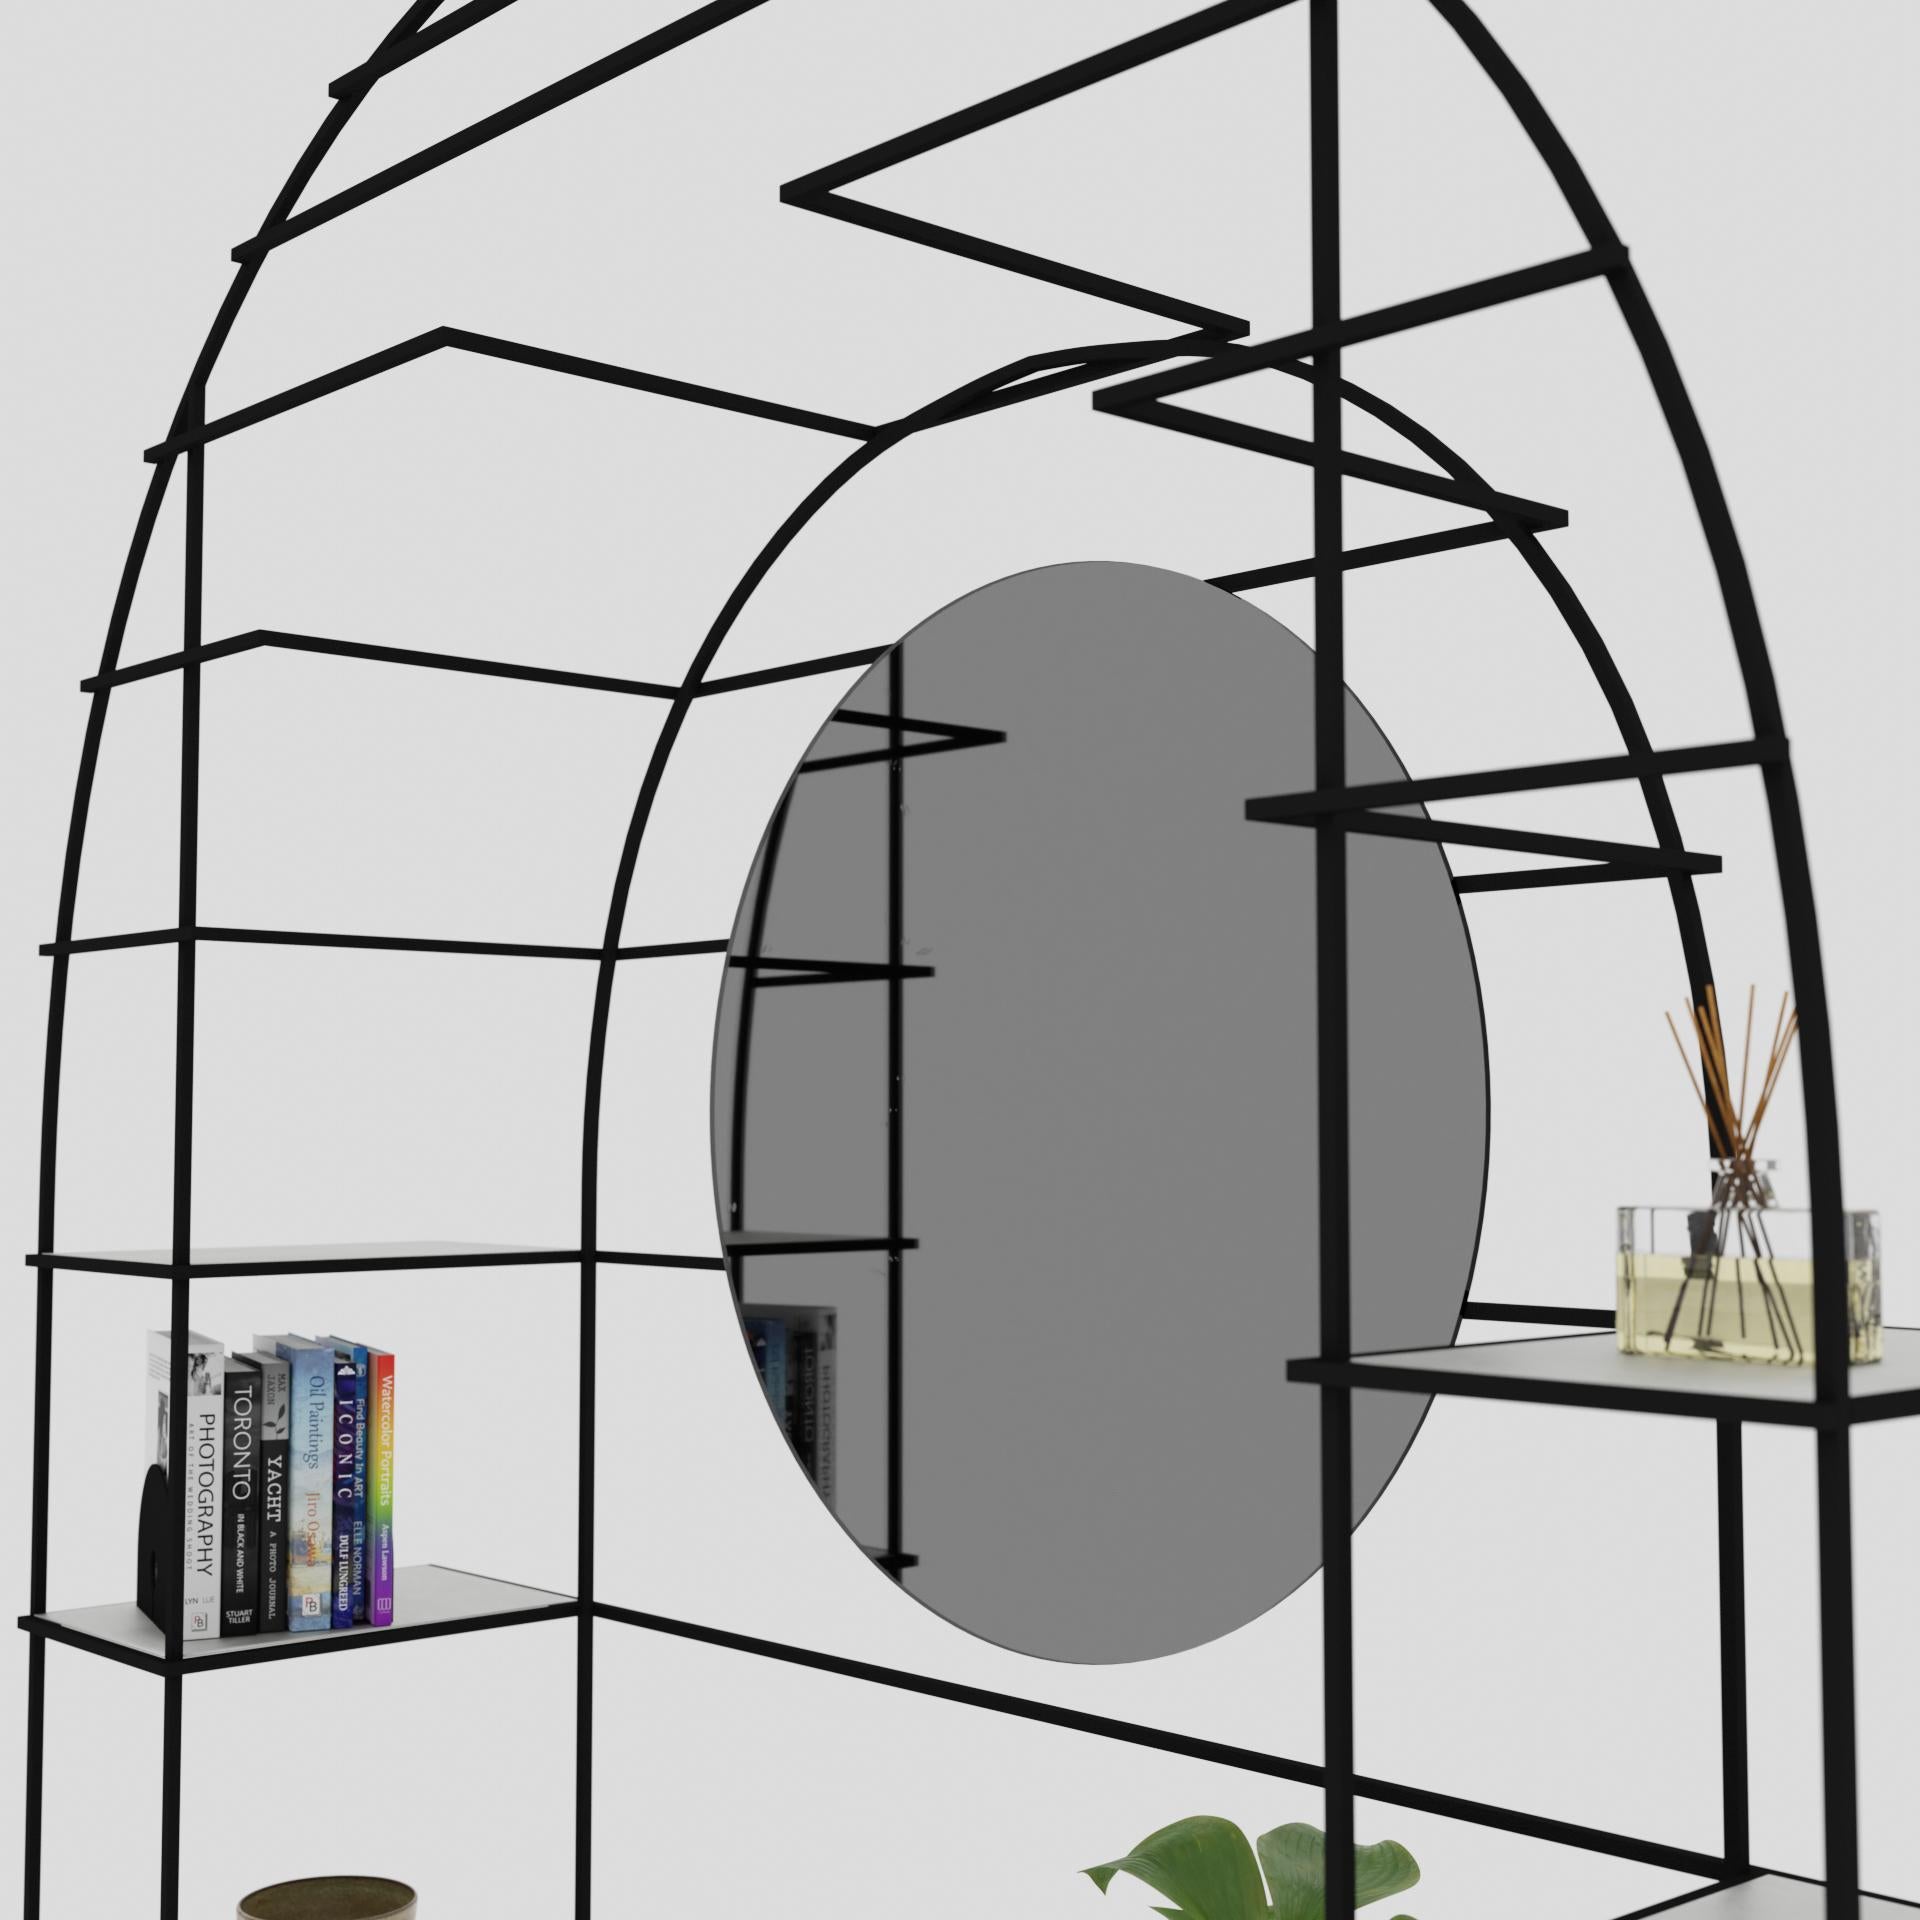 PORTAL is a lightweight steel display shelf system with a circular wall mirror that is assembled from 4 welded steel sections with aluminum plates for shelving. The steel has a durable matte black powdercoat and can be color matched or customized